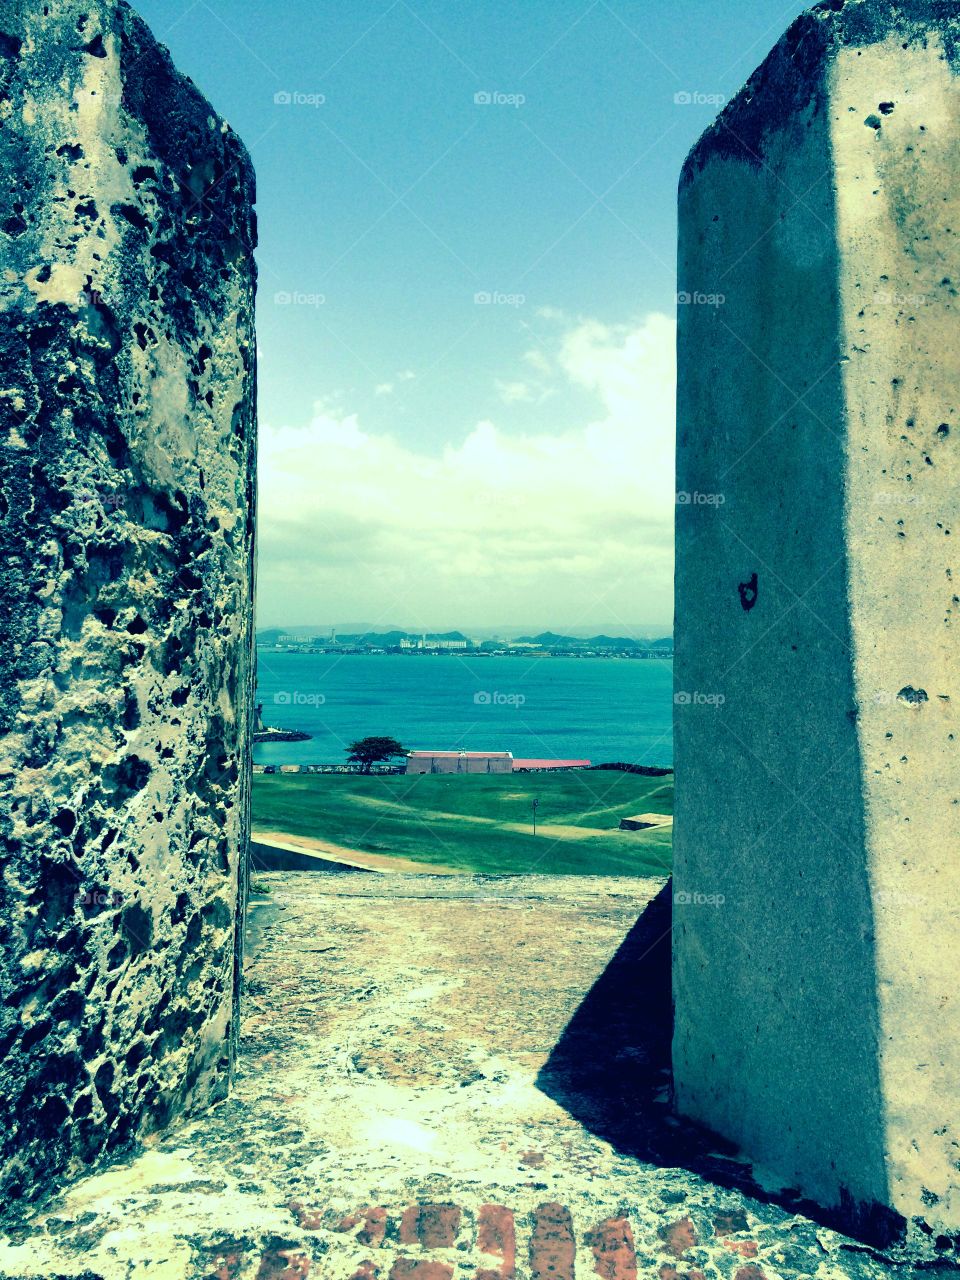 View. When looking between the crenellations of El Morro, the lovely San Juan harbor is a sight to see.